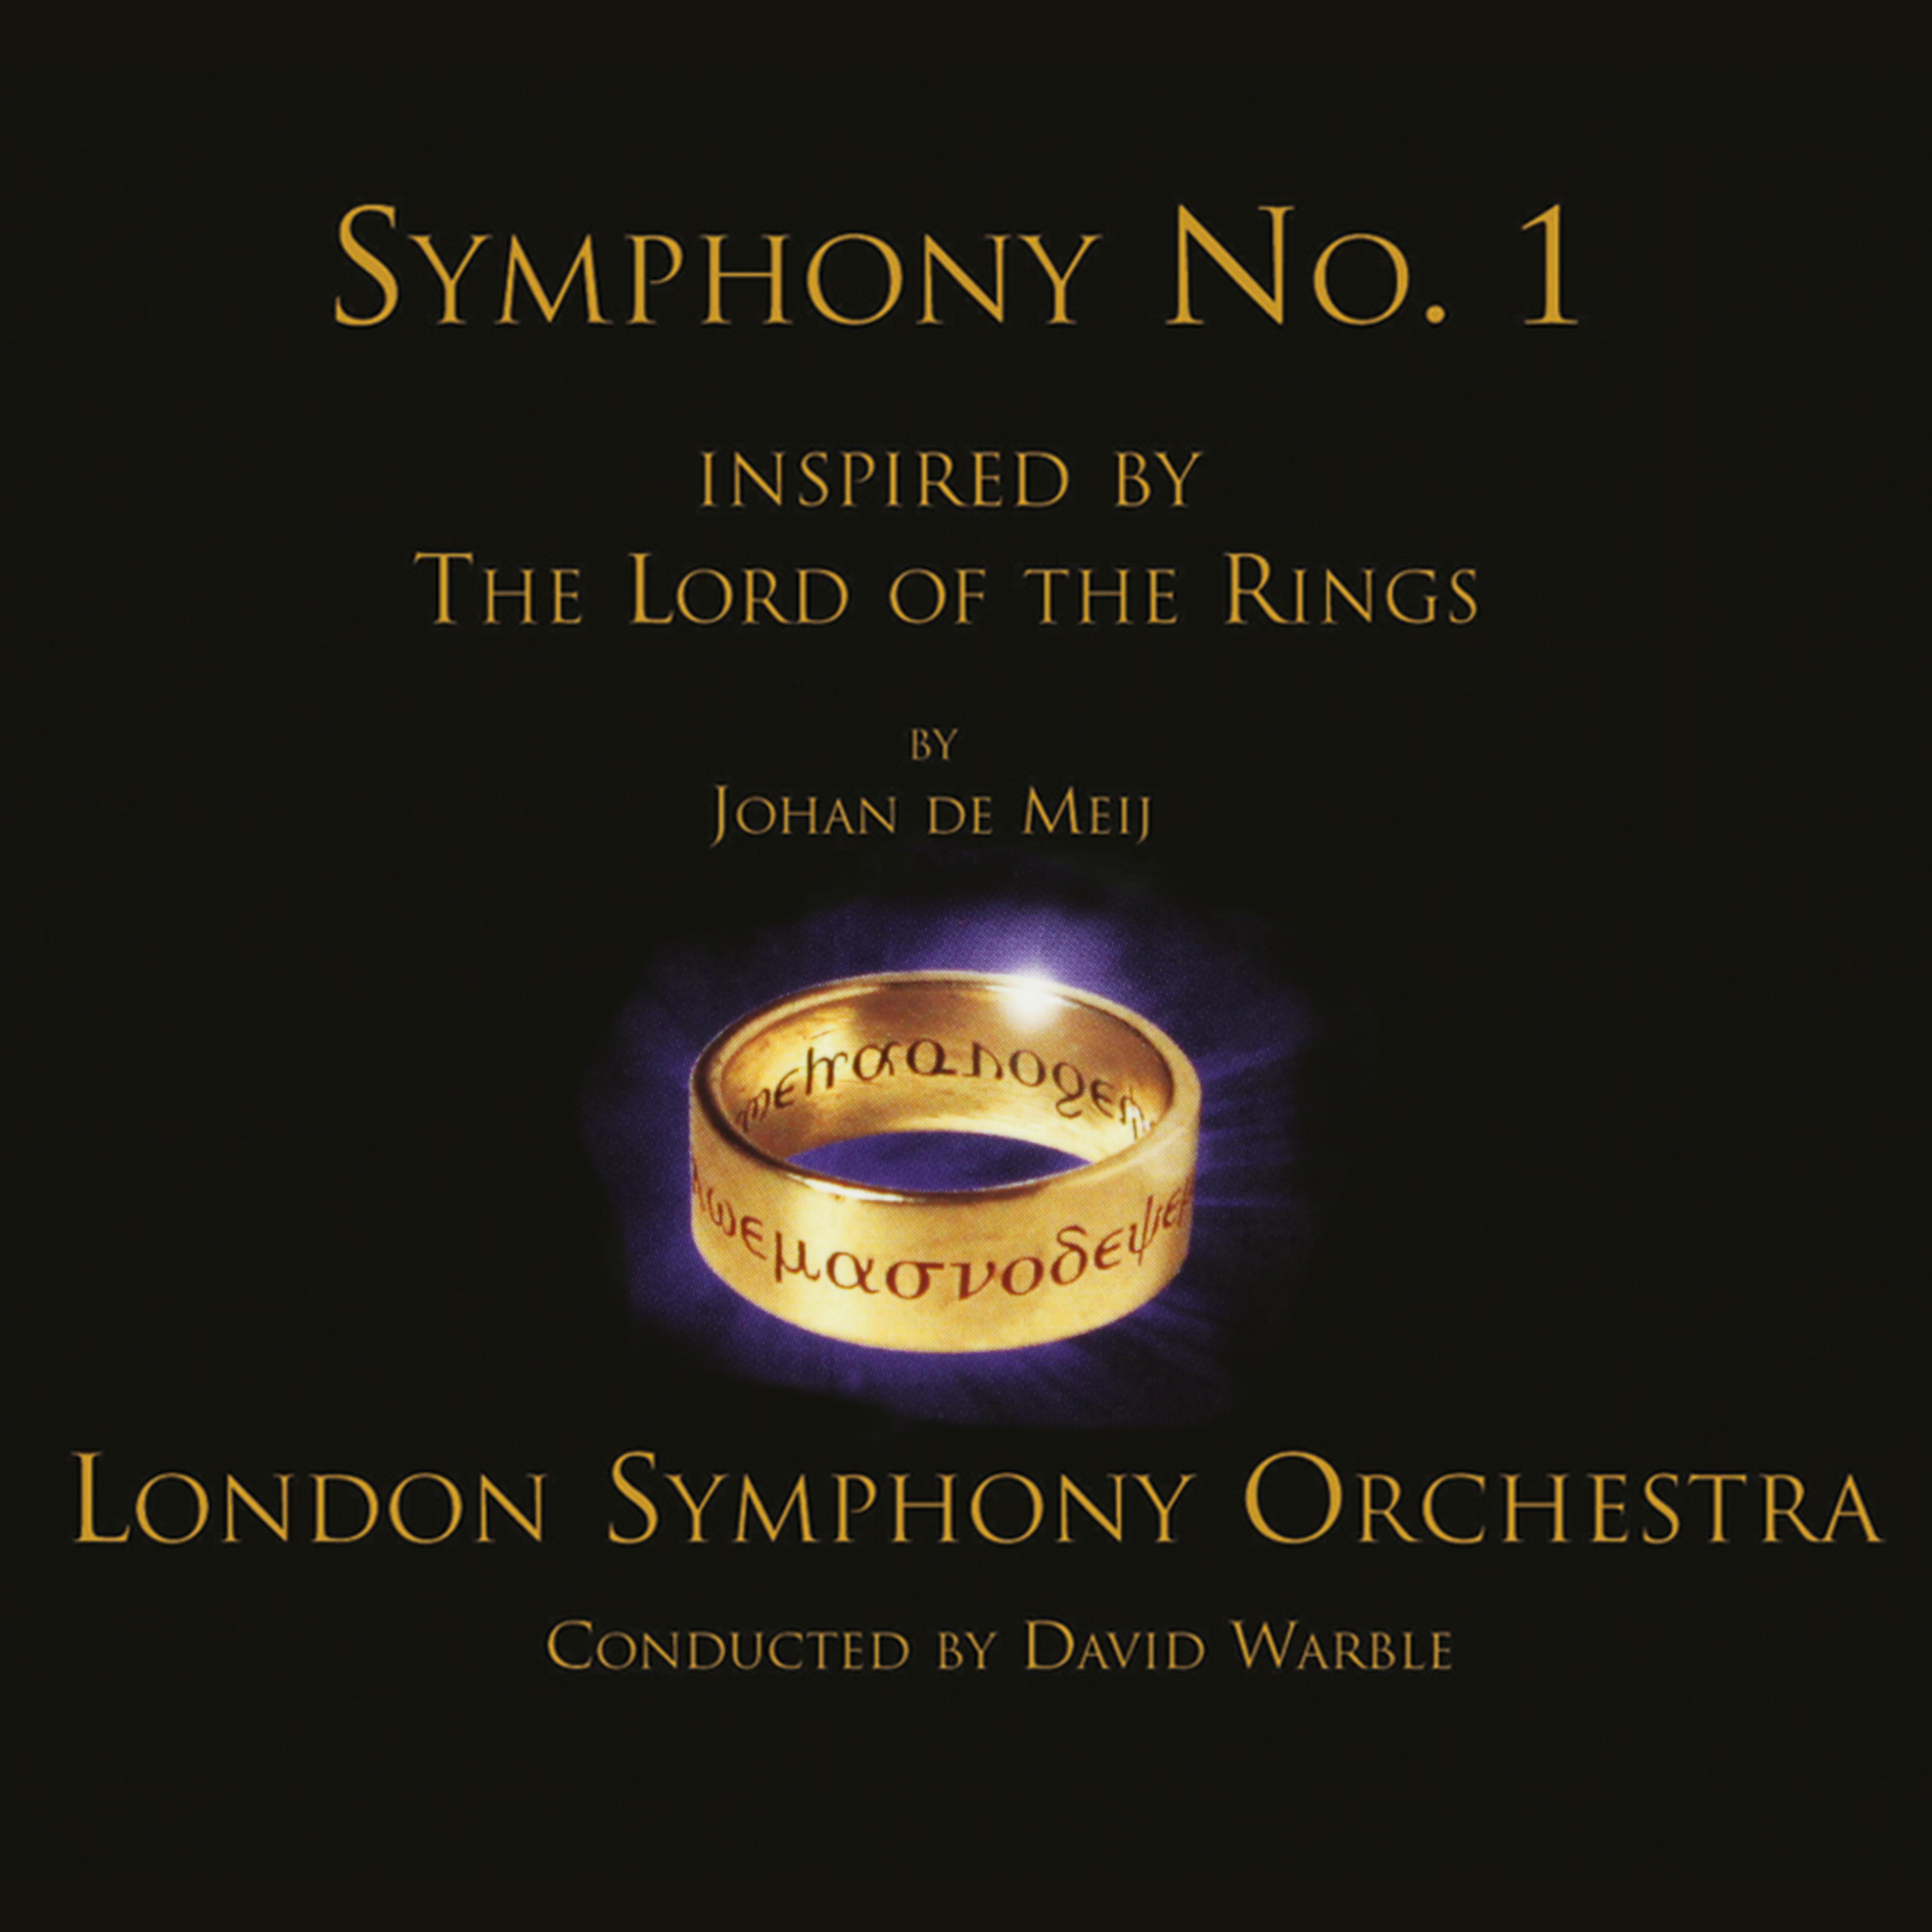 Постер альбома De Meij: Symphony No. 1, "The Lord of the Rings" / Dukas: The Sorcerer's Apprentice